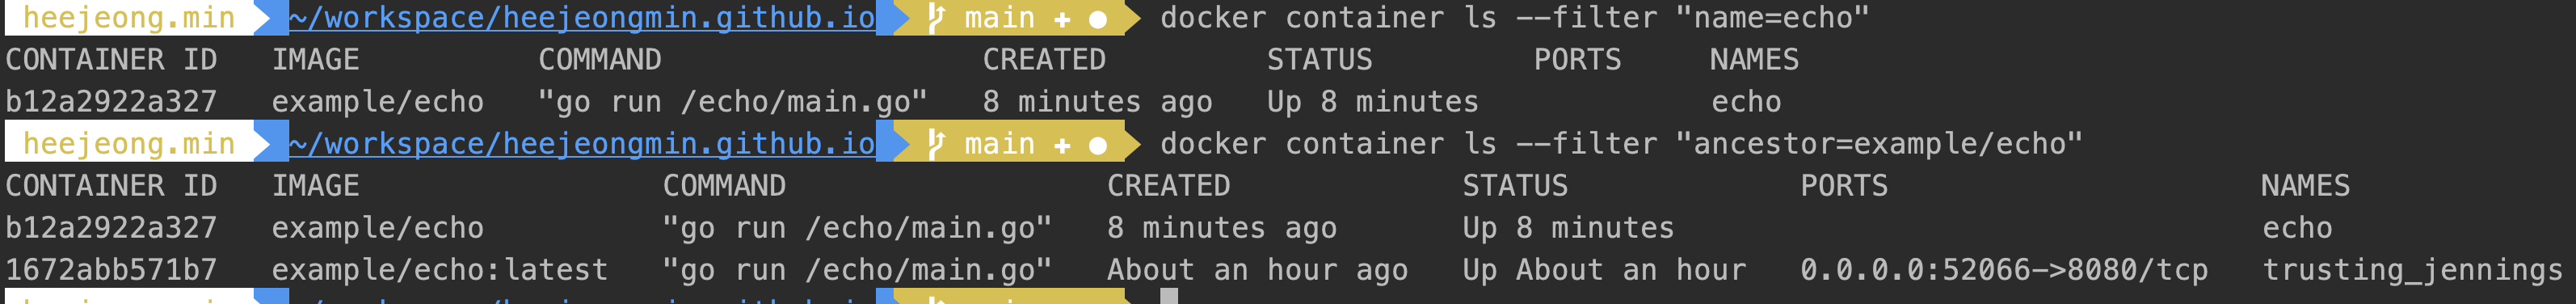 container_filter.png